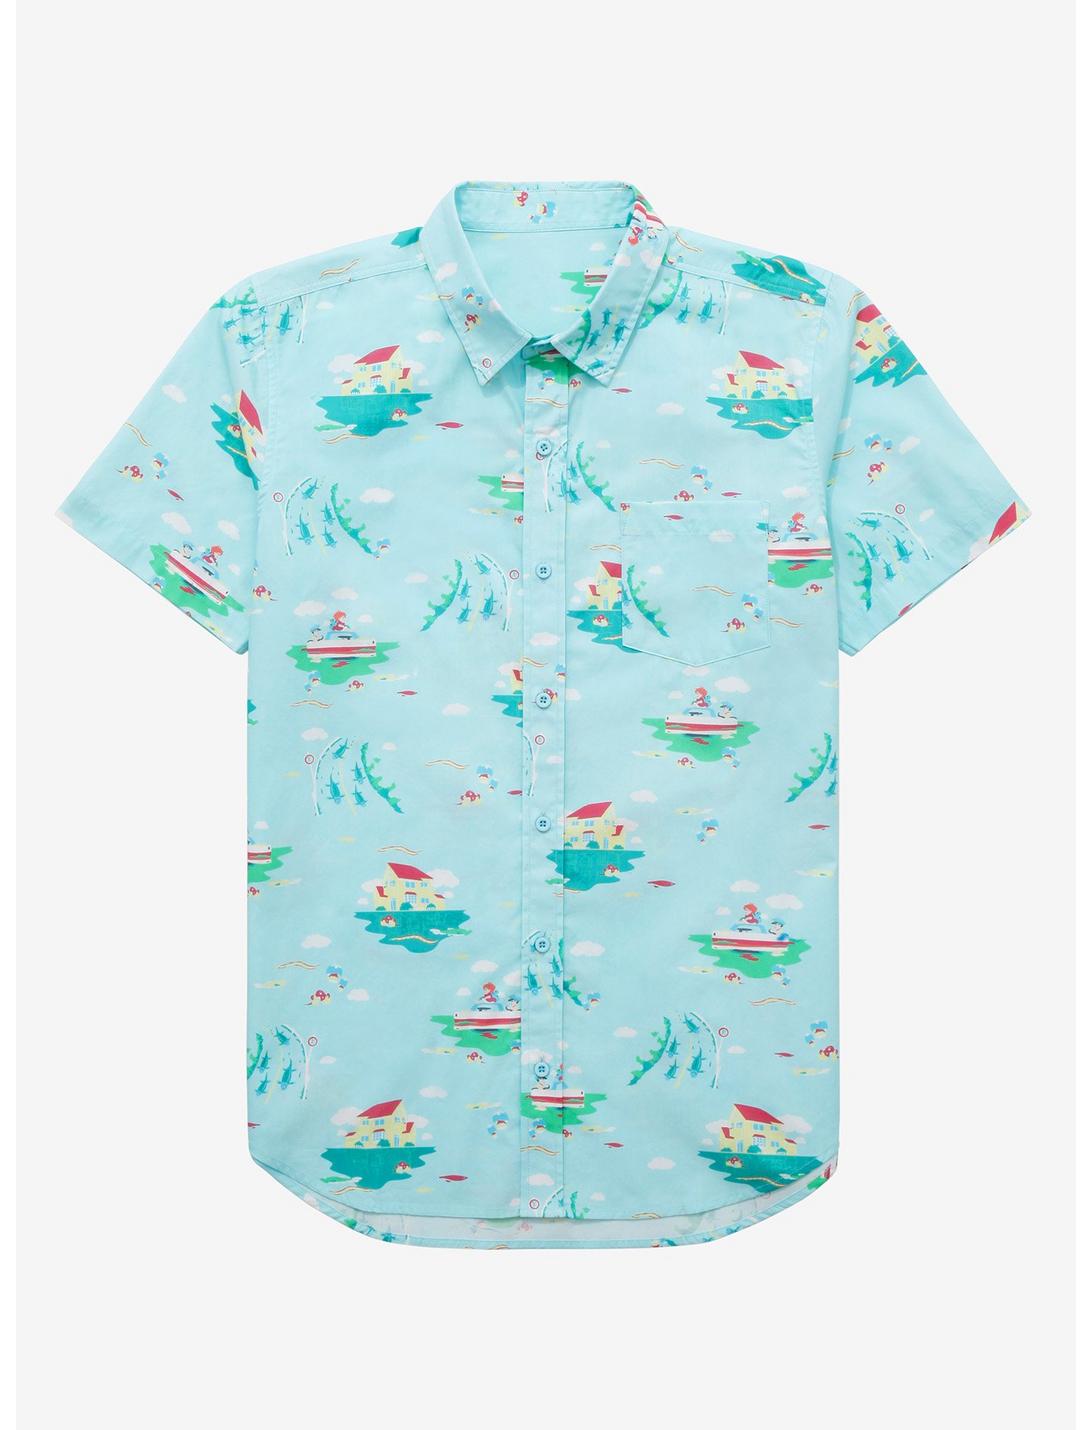 Studio Ghibli Ponyo Ocean Scenery Woven Button-Up - BoxLunch Exclusive, LIGHT BLUE, hi-res